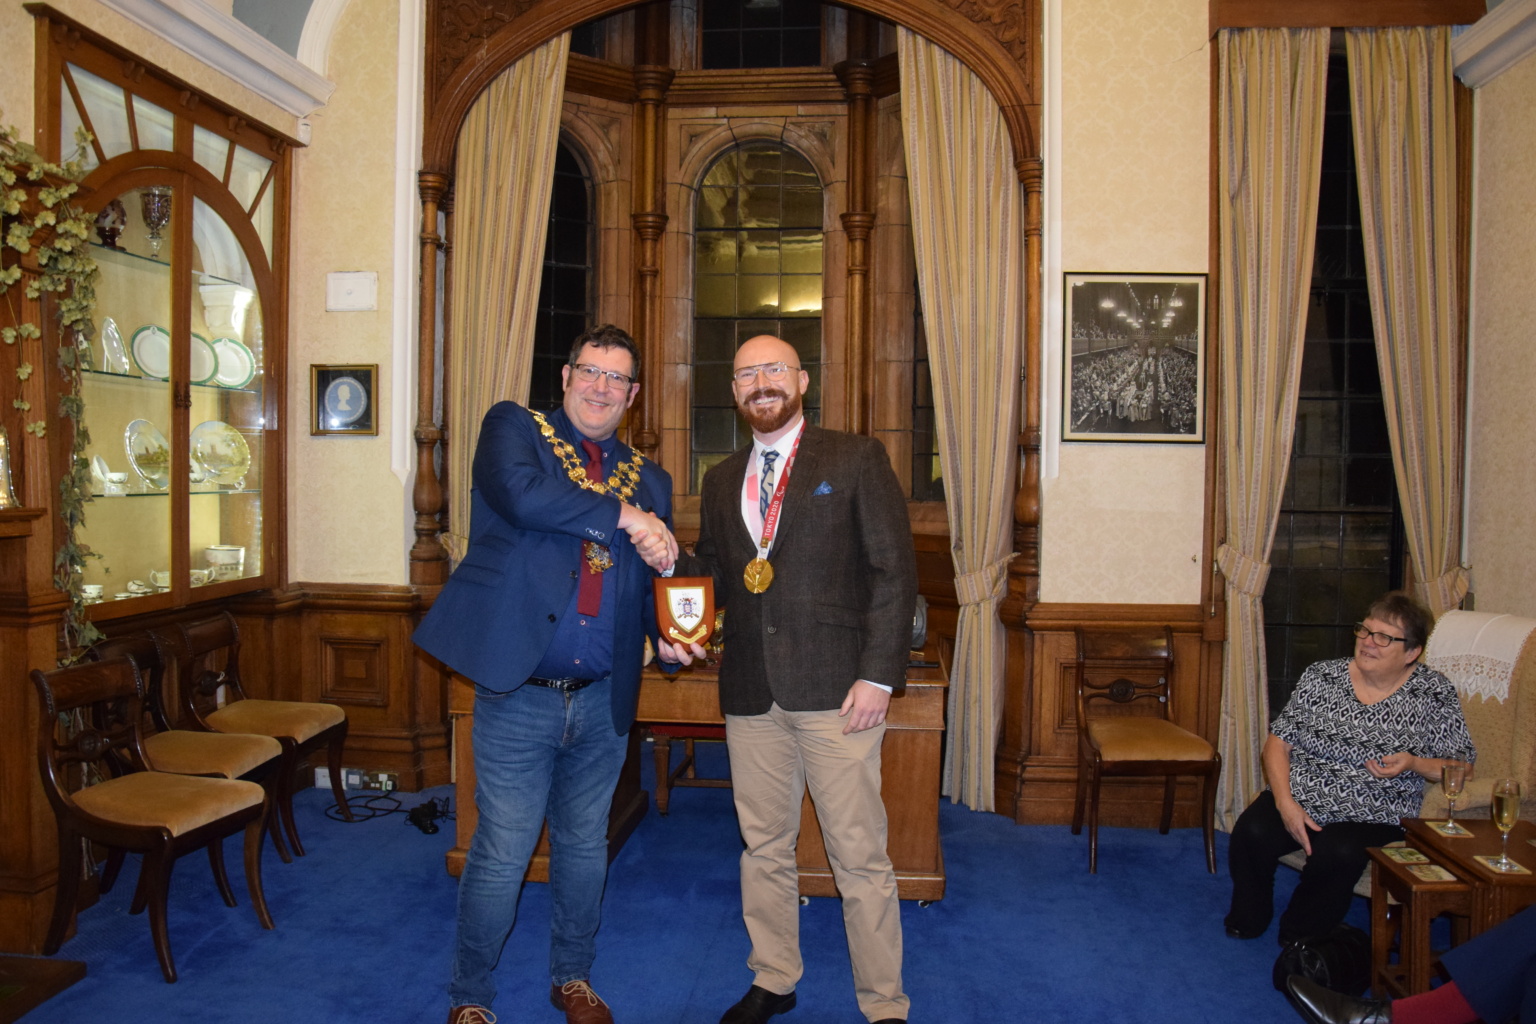 NEWS | Mayor of Hereford presents Paralympic Javelin Gold Medalist Dan Pembroke with award